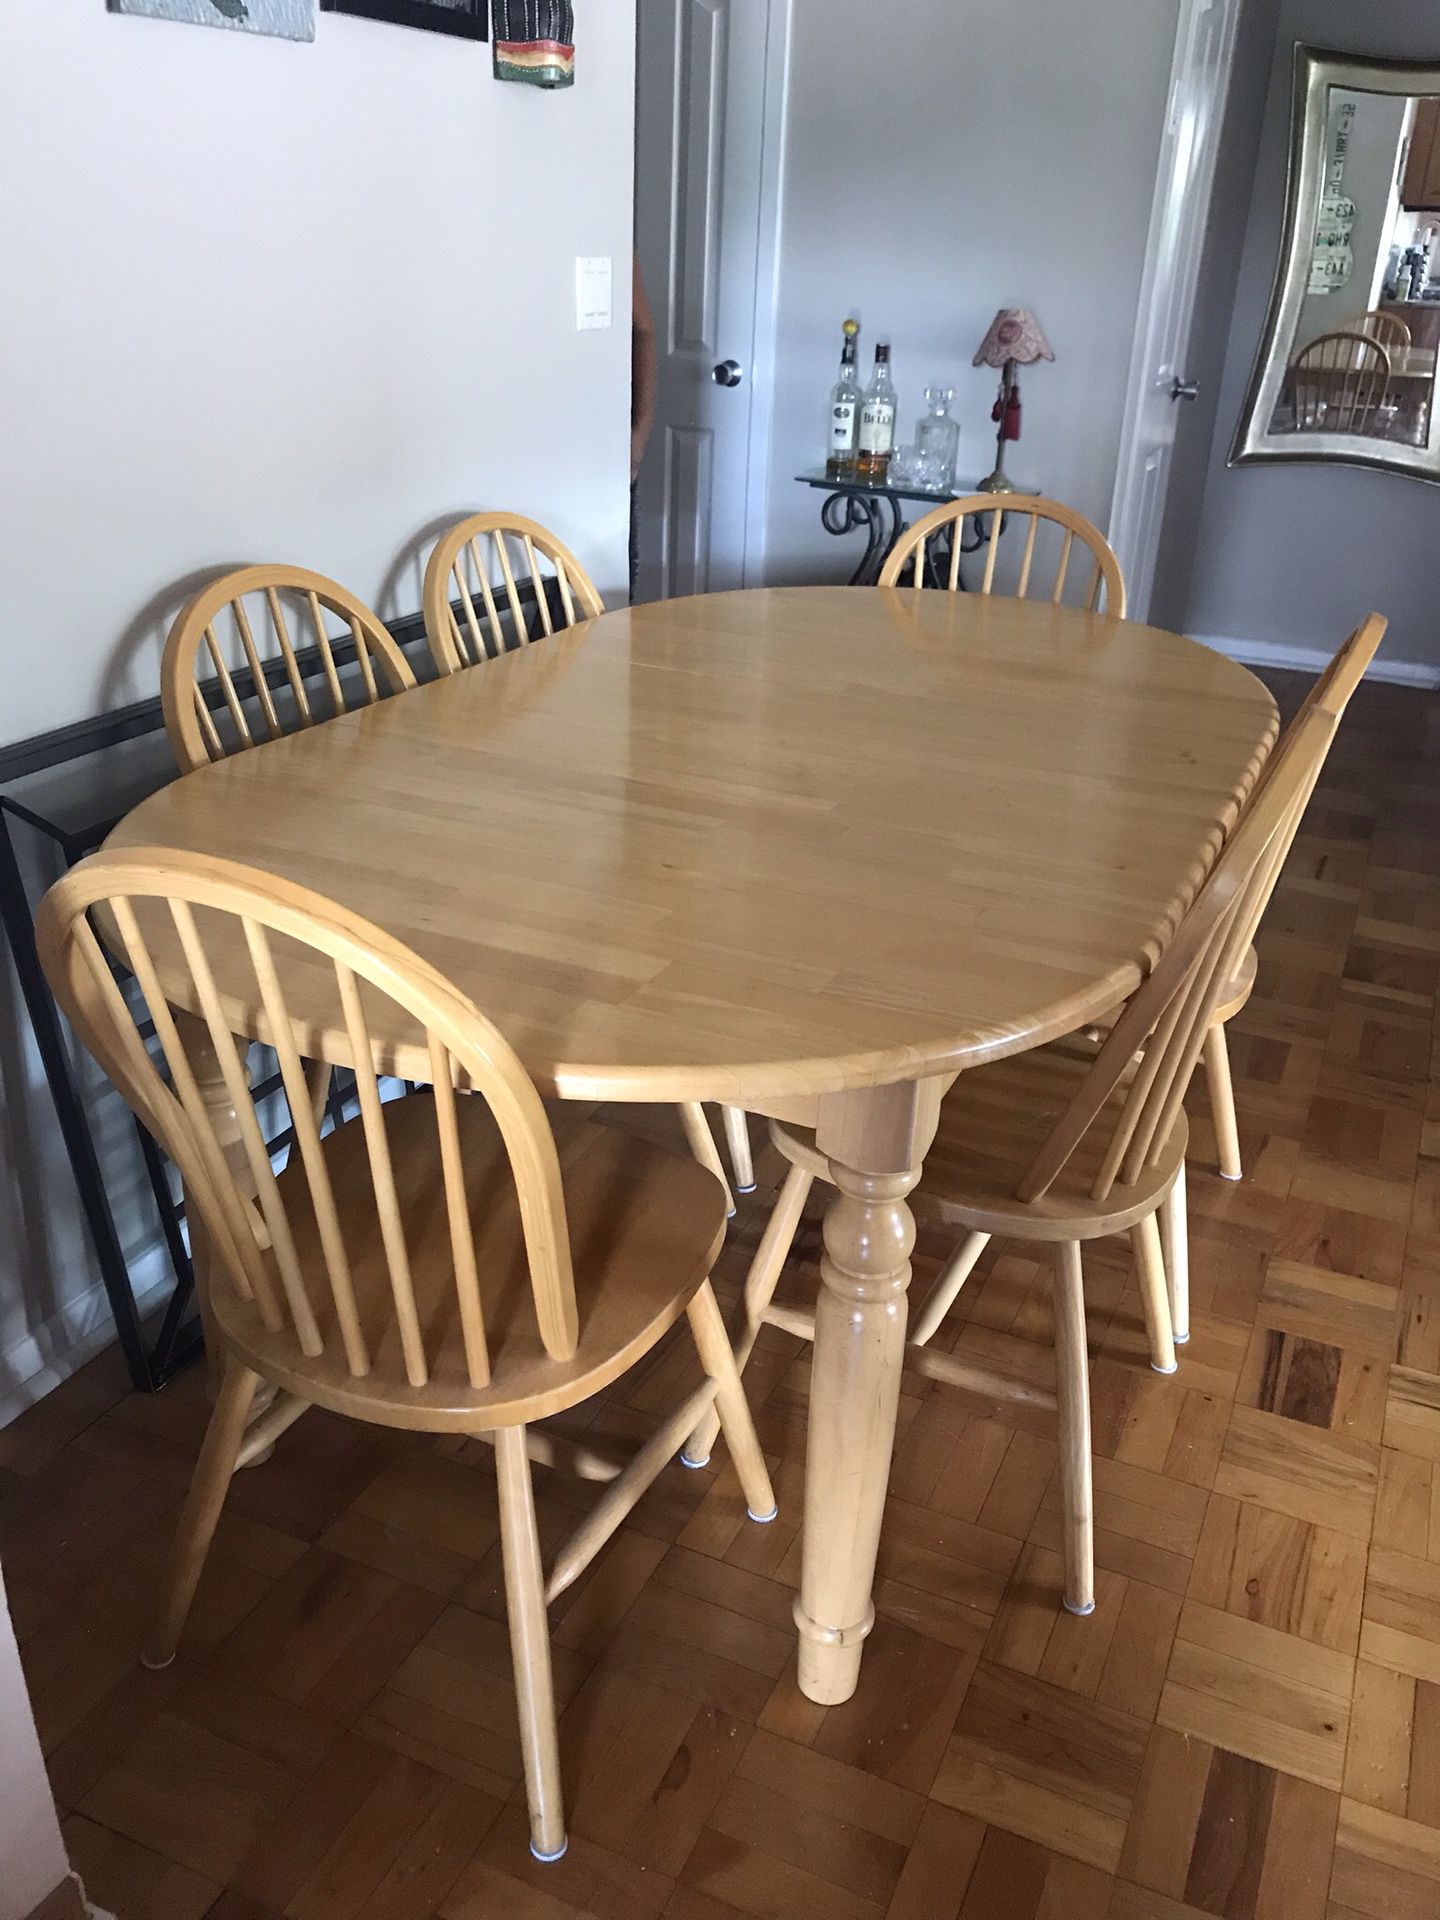 Kitchen table with removable leaf insert and 6 chairs